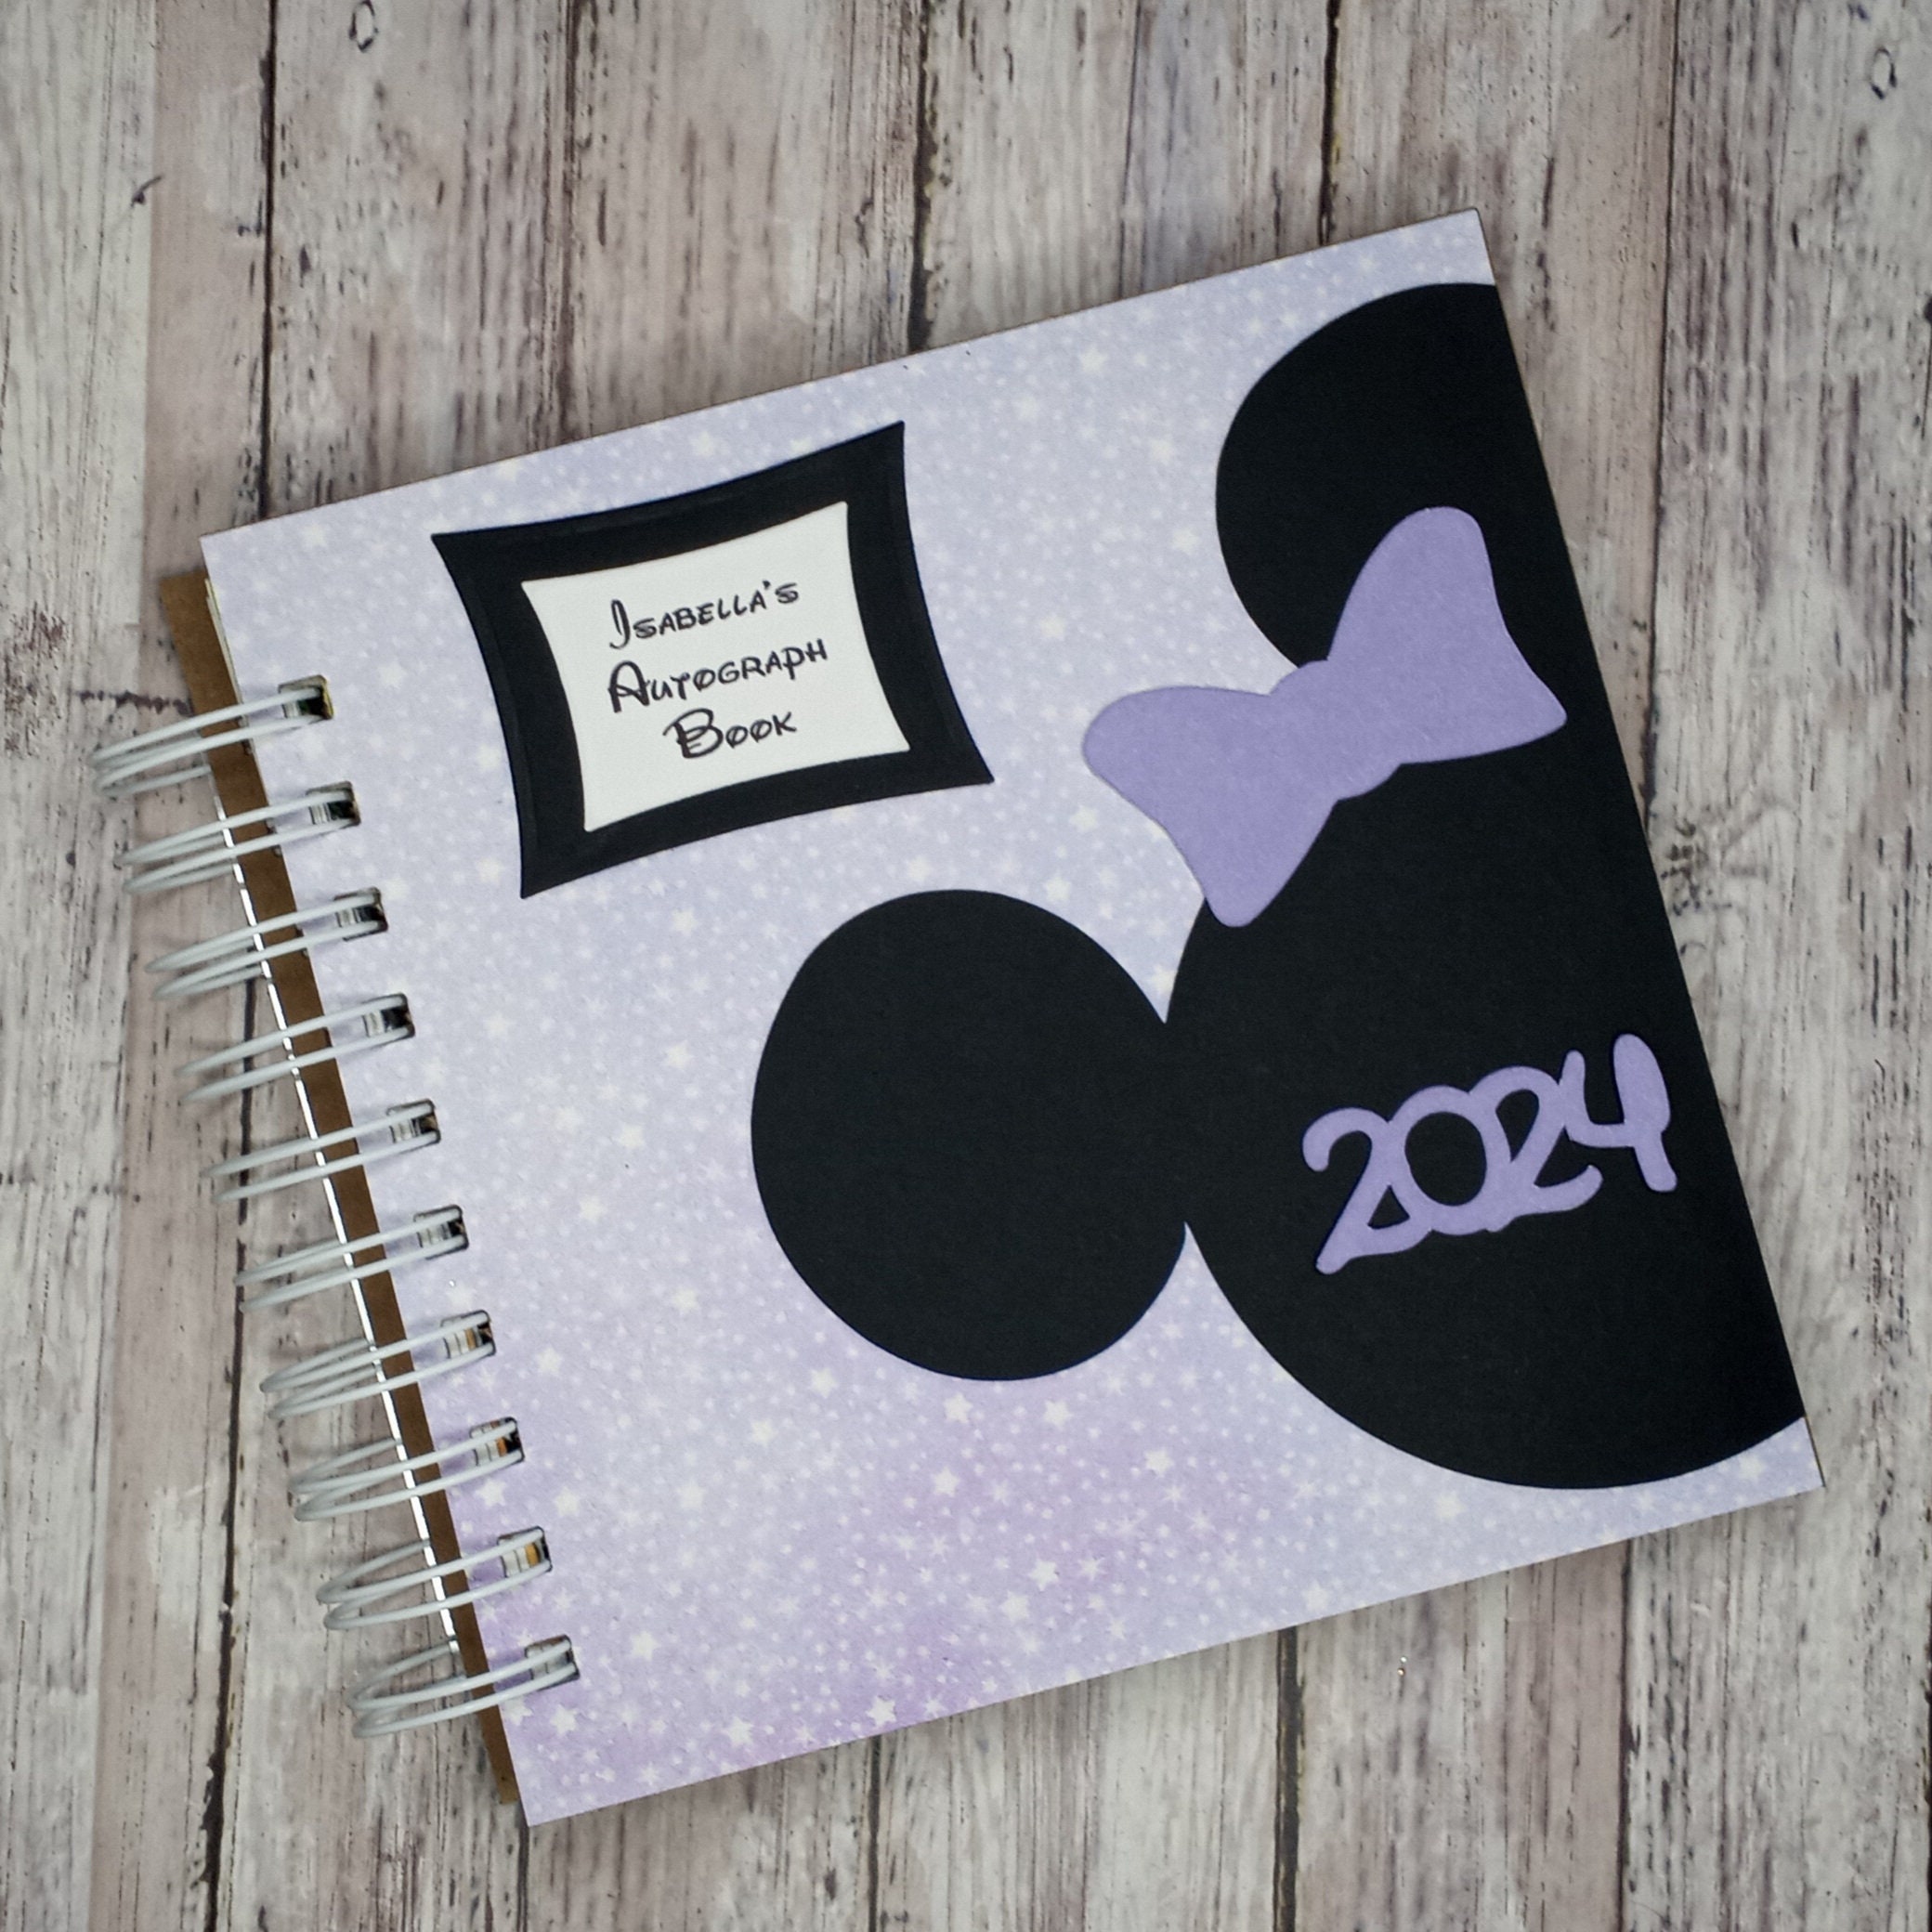 Disneyland Autograph Book 2023 and 2024 Digital Files (Instant